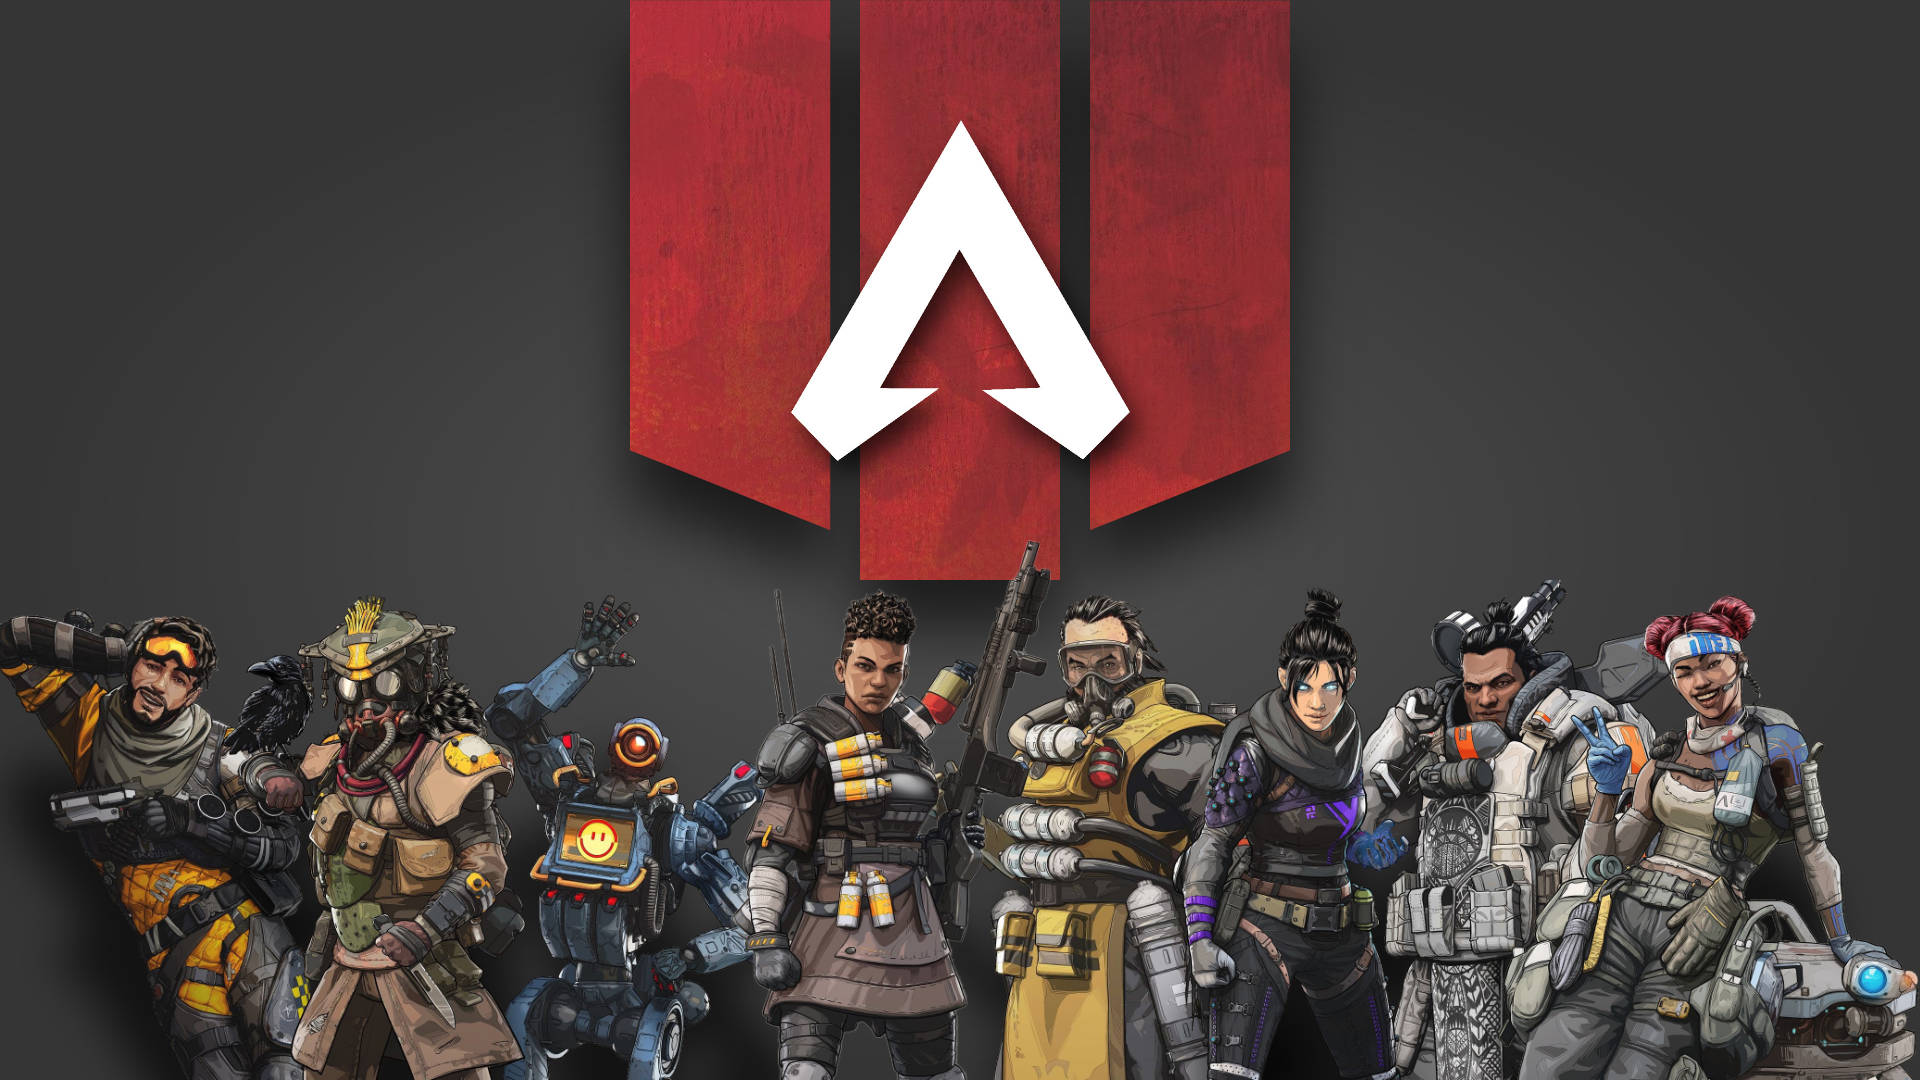 1920X1080 Apex Legends Wallpaper and Background